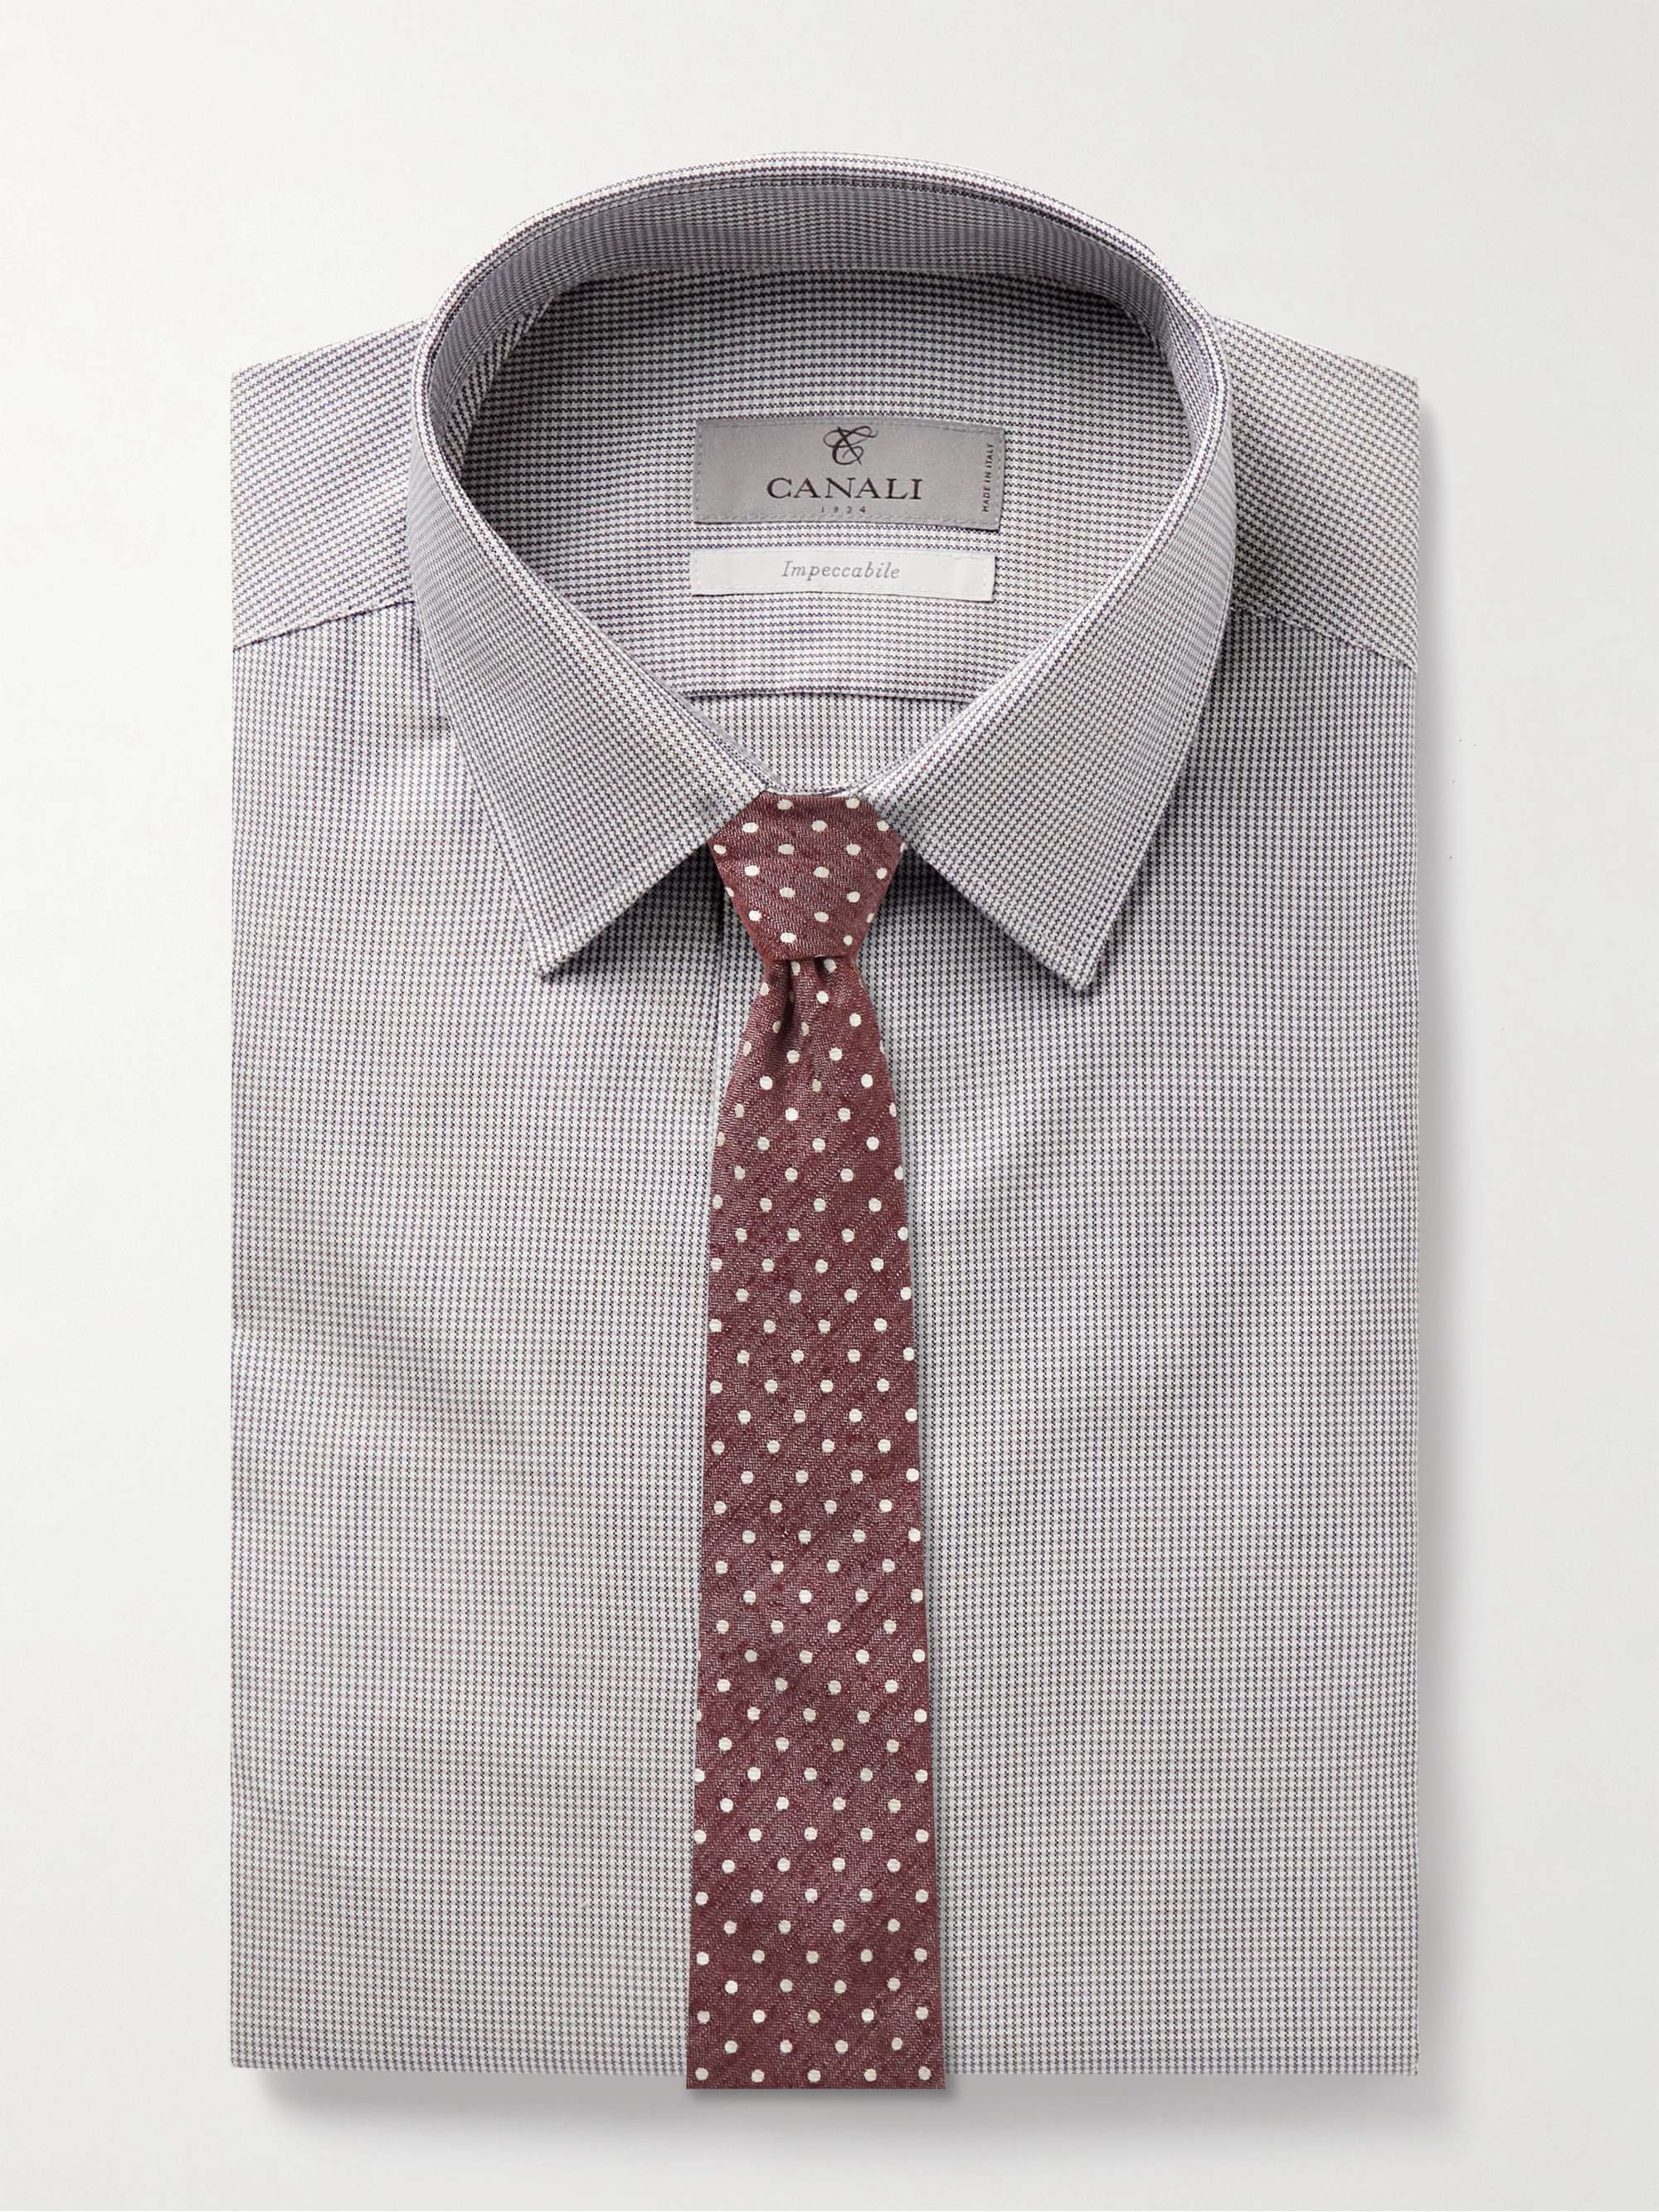 CANALI Slim-Fit Puppytooth Impeccabile Cotton Shirt